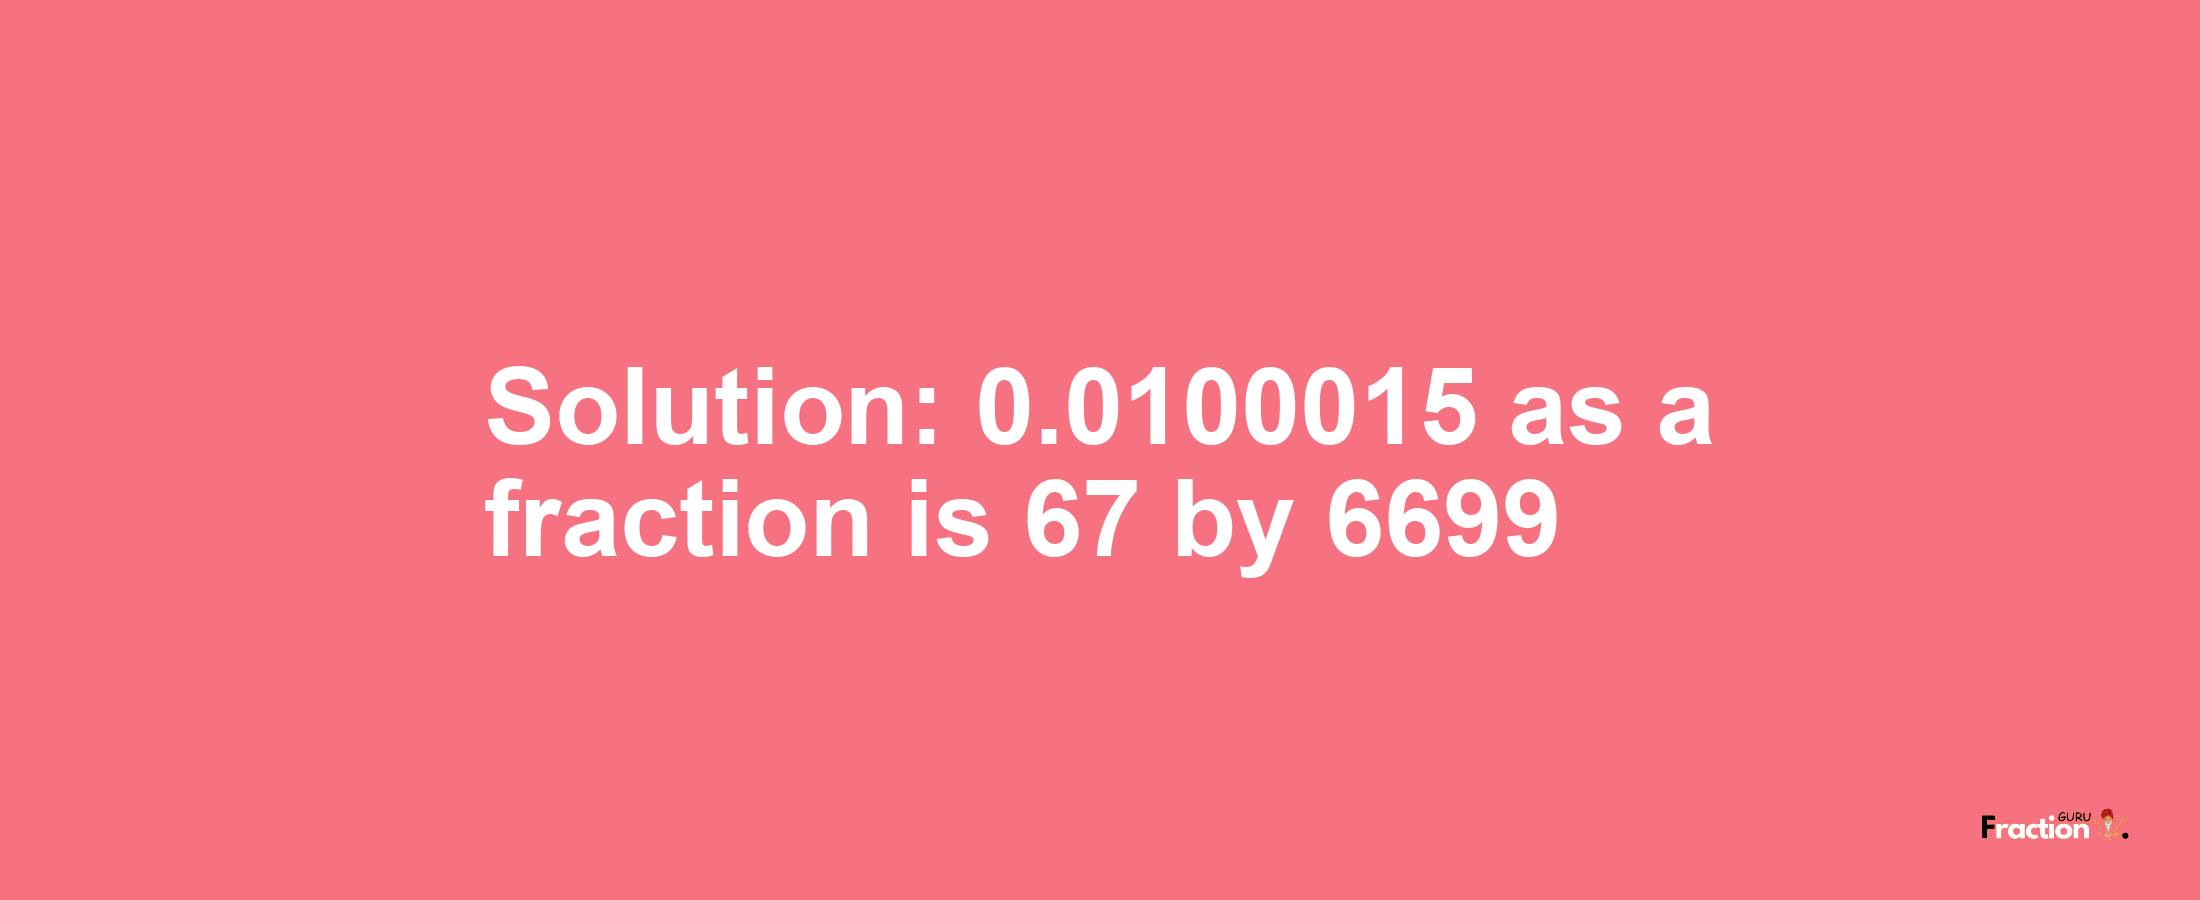 Solution:0.0100015 as a fraction is 67/6699